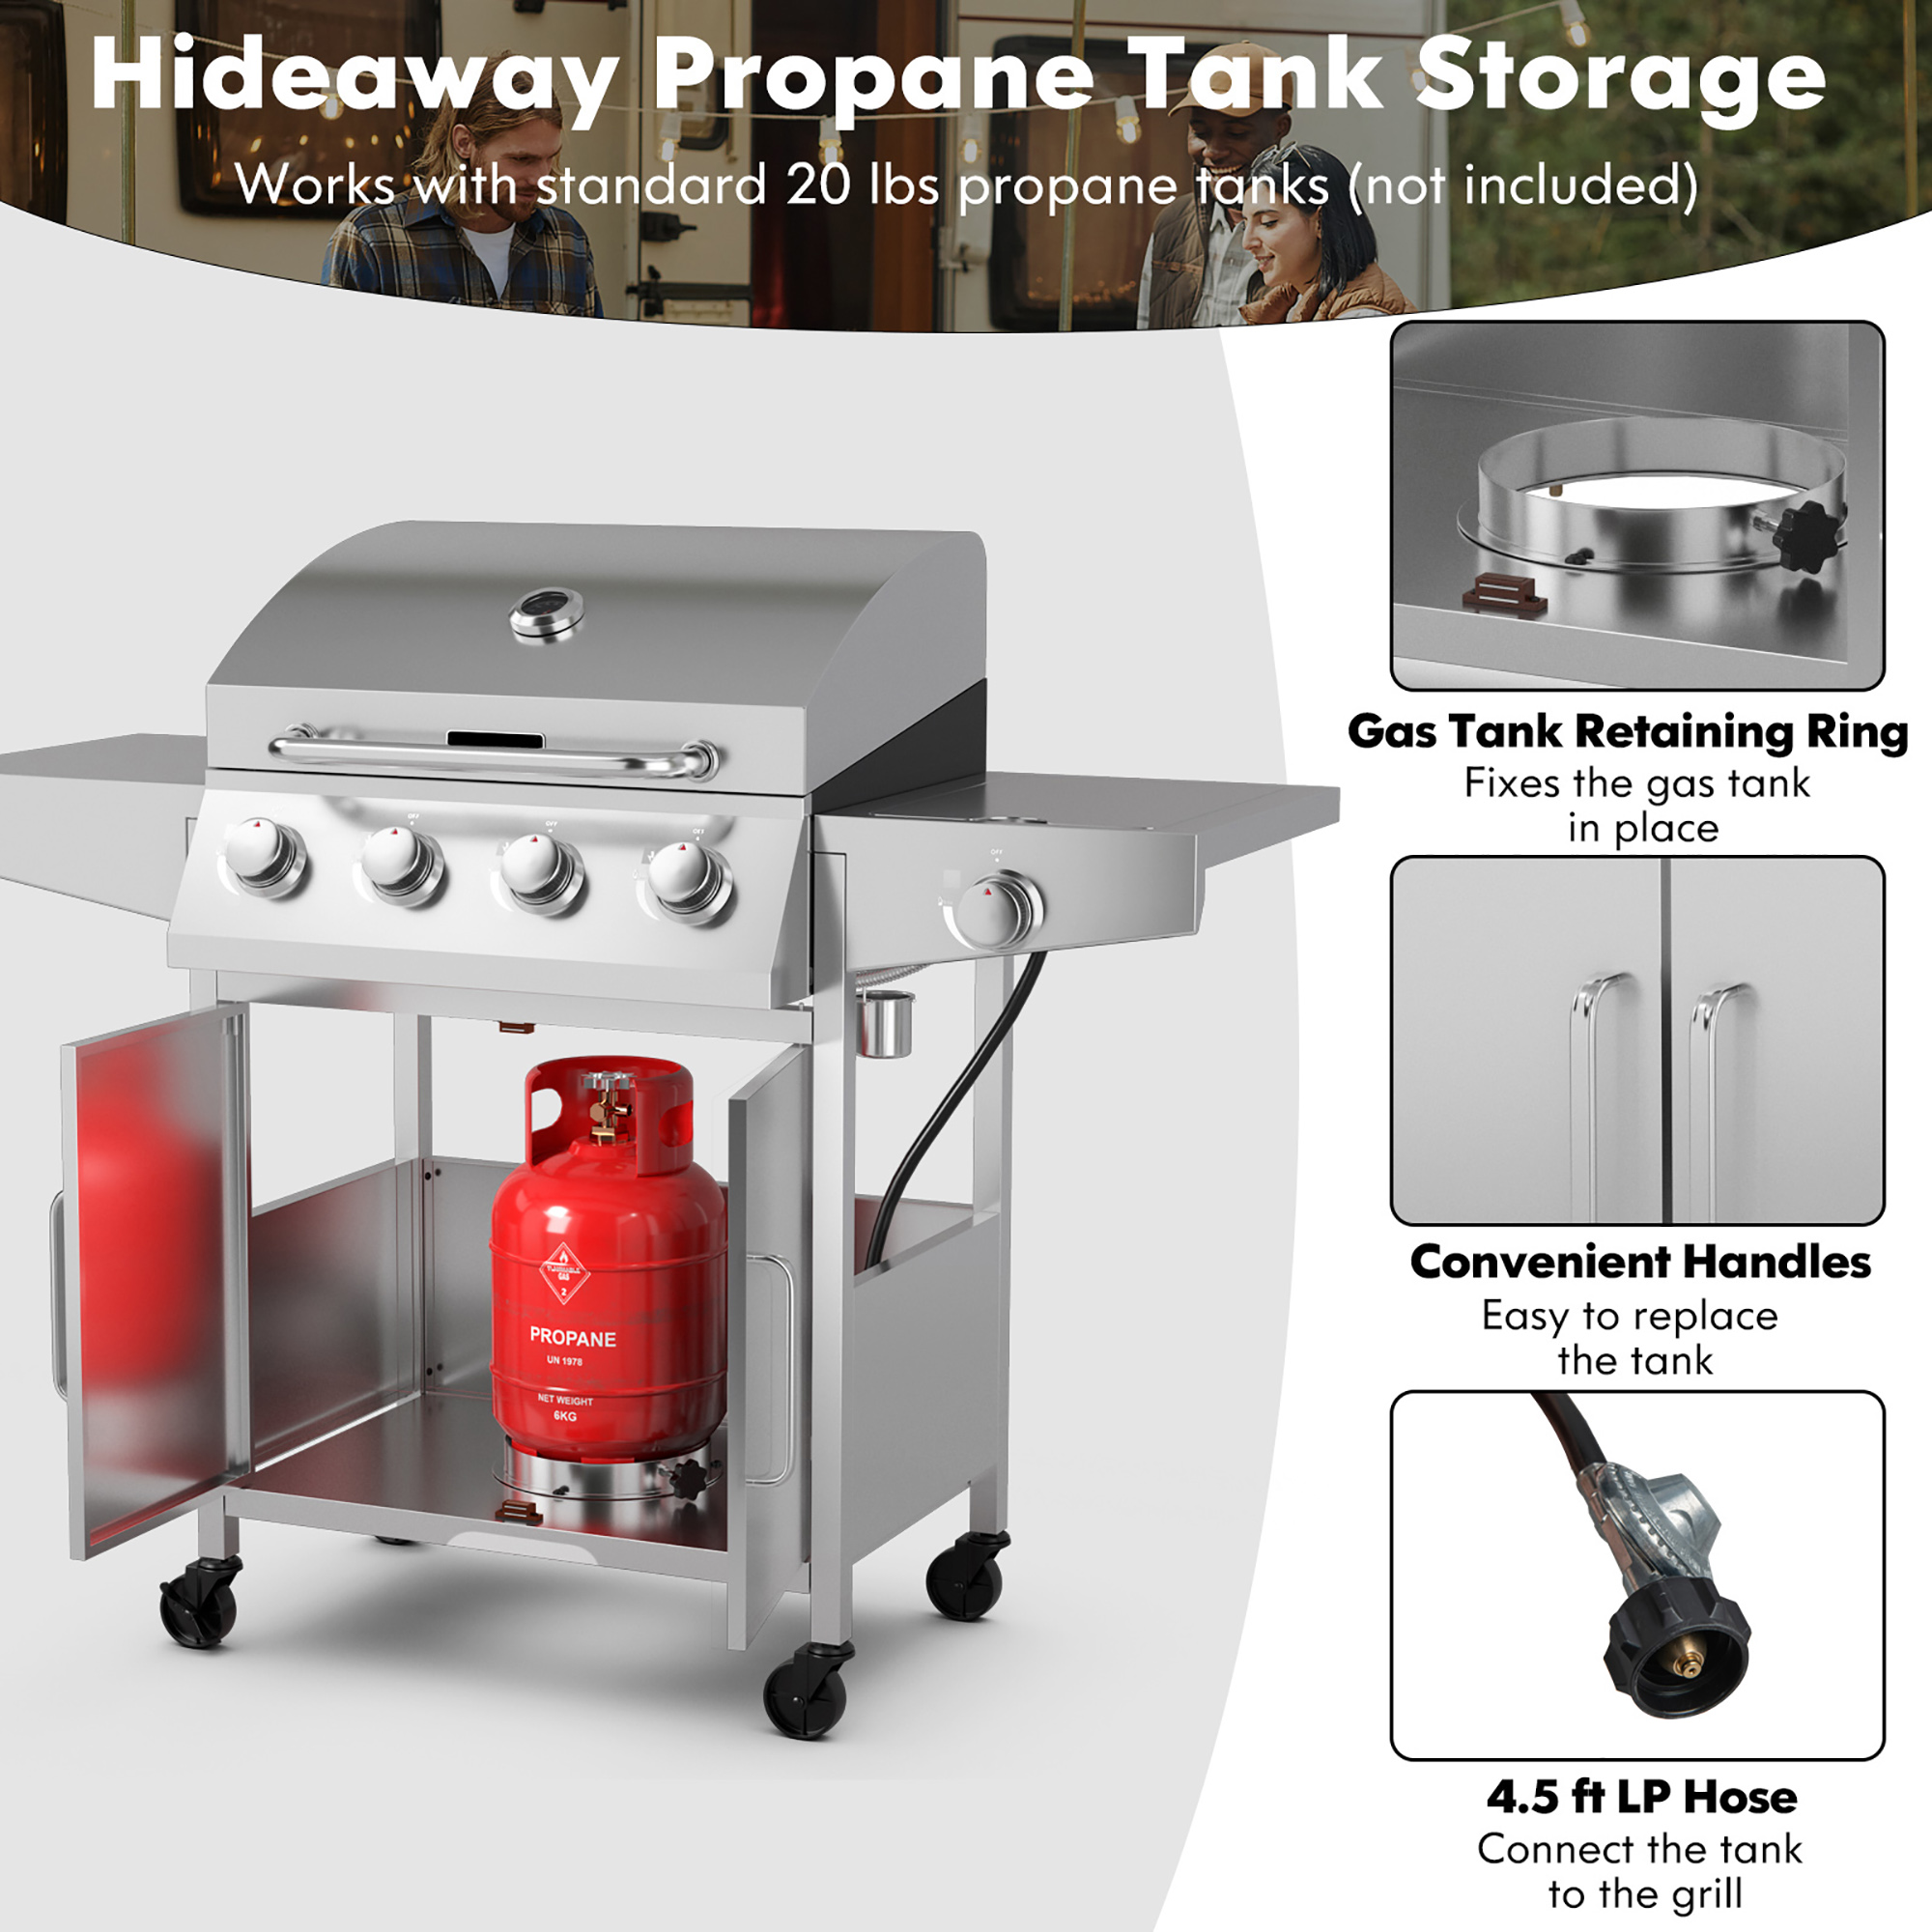 Costway 5-Burner Propane Gas BBQ Grill withSide Burner,Thermometer,Prep Table 50000 BTU